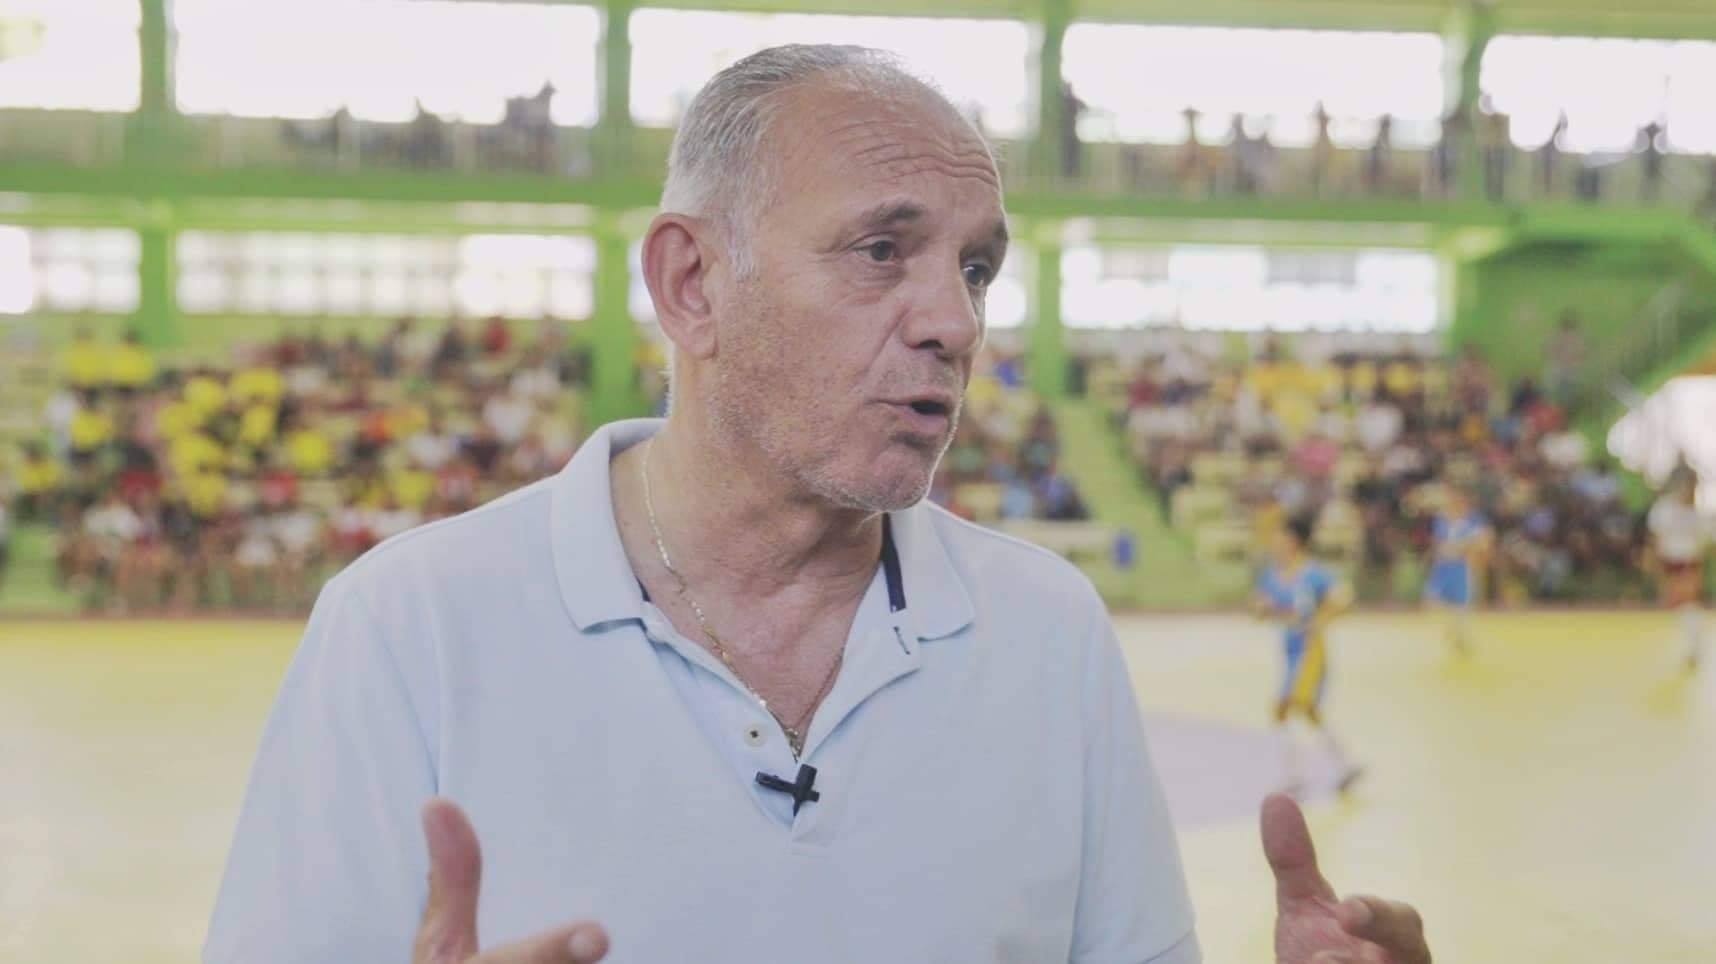 An in-depth and insightful look at futsal development in the Philippines